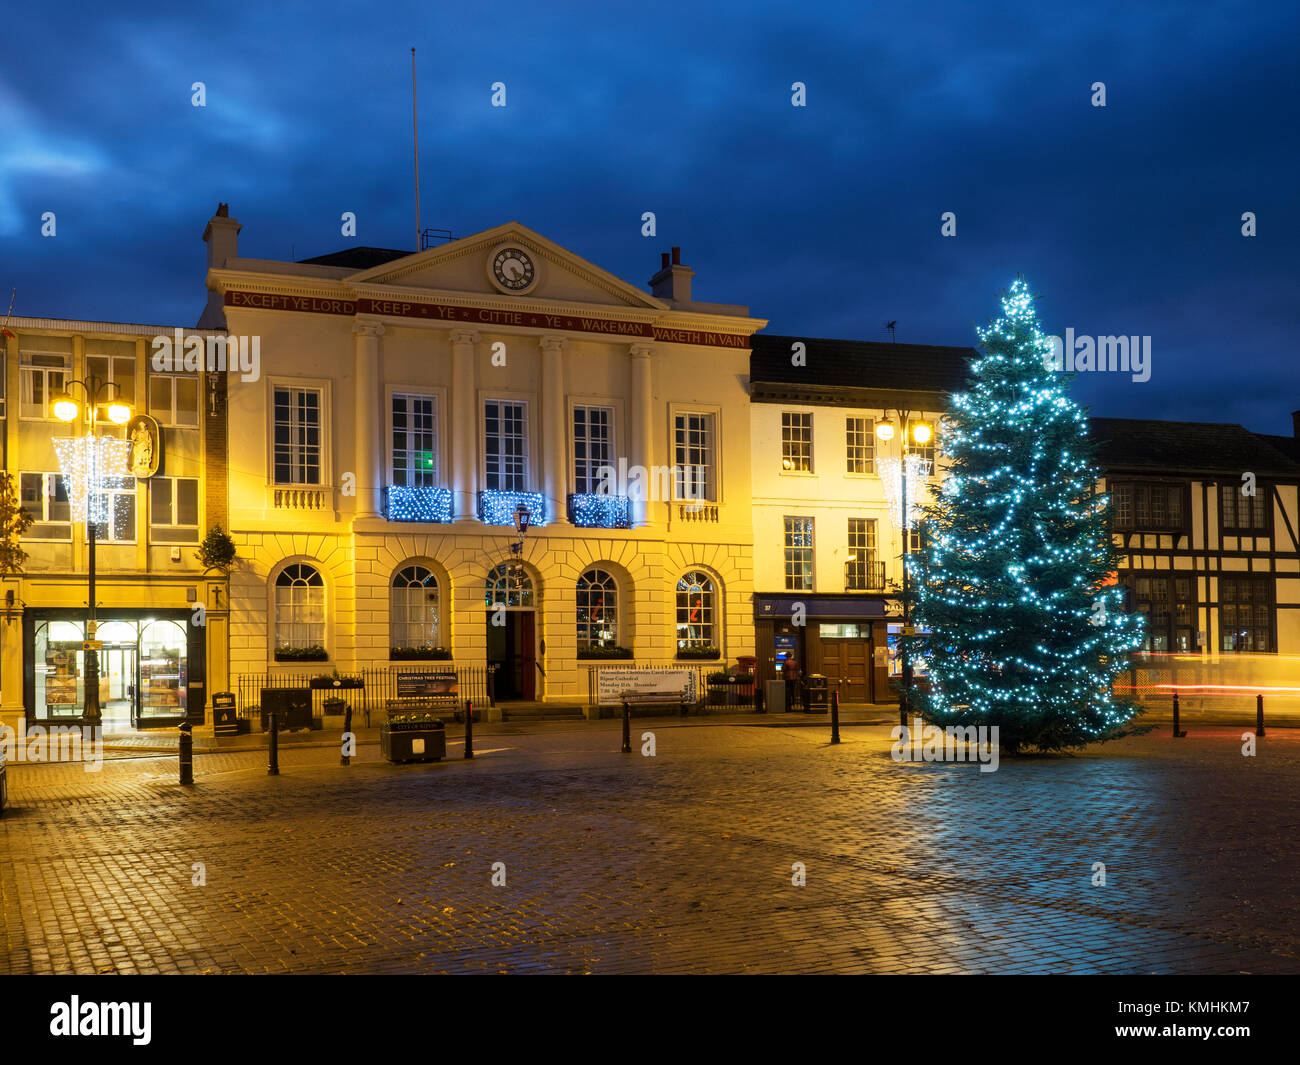 Christmas Tree in the Market Place in front of the City Hall at Dusk